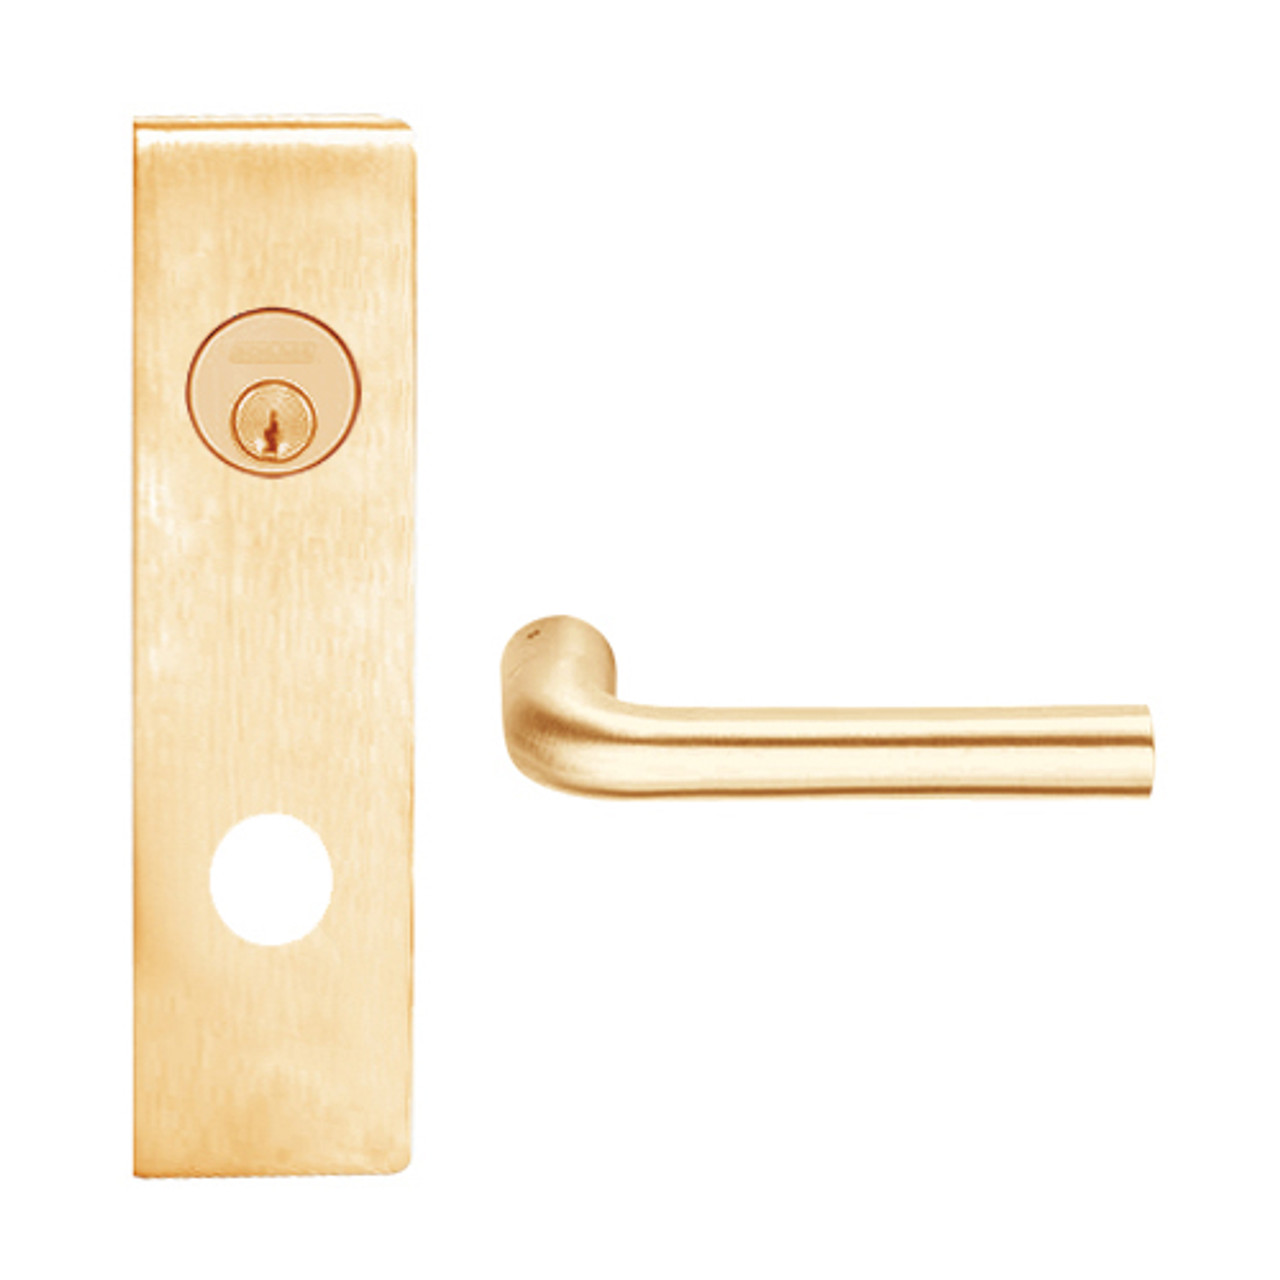 L9082P-02N-612 Schlage L Series Institution Commercial Mortise Lock with 02 Cast Lever Design in Satin Bronze